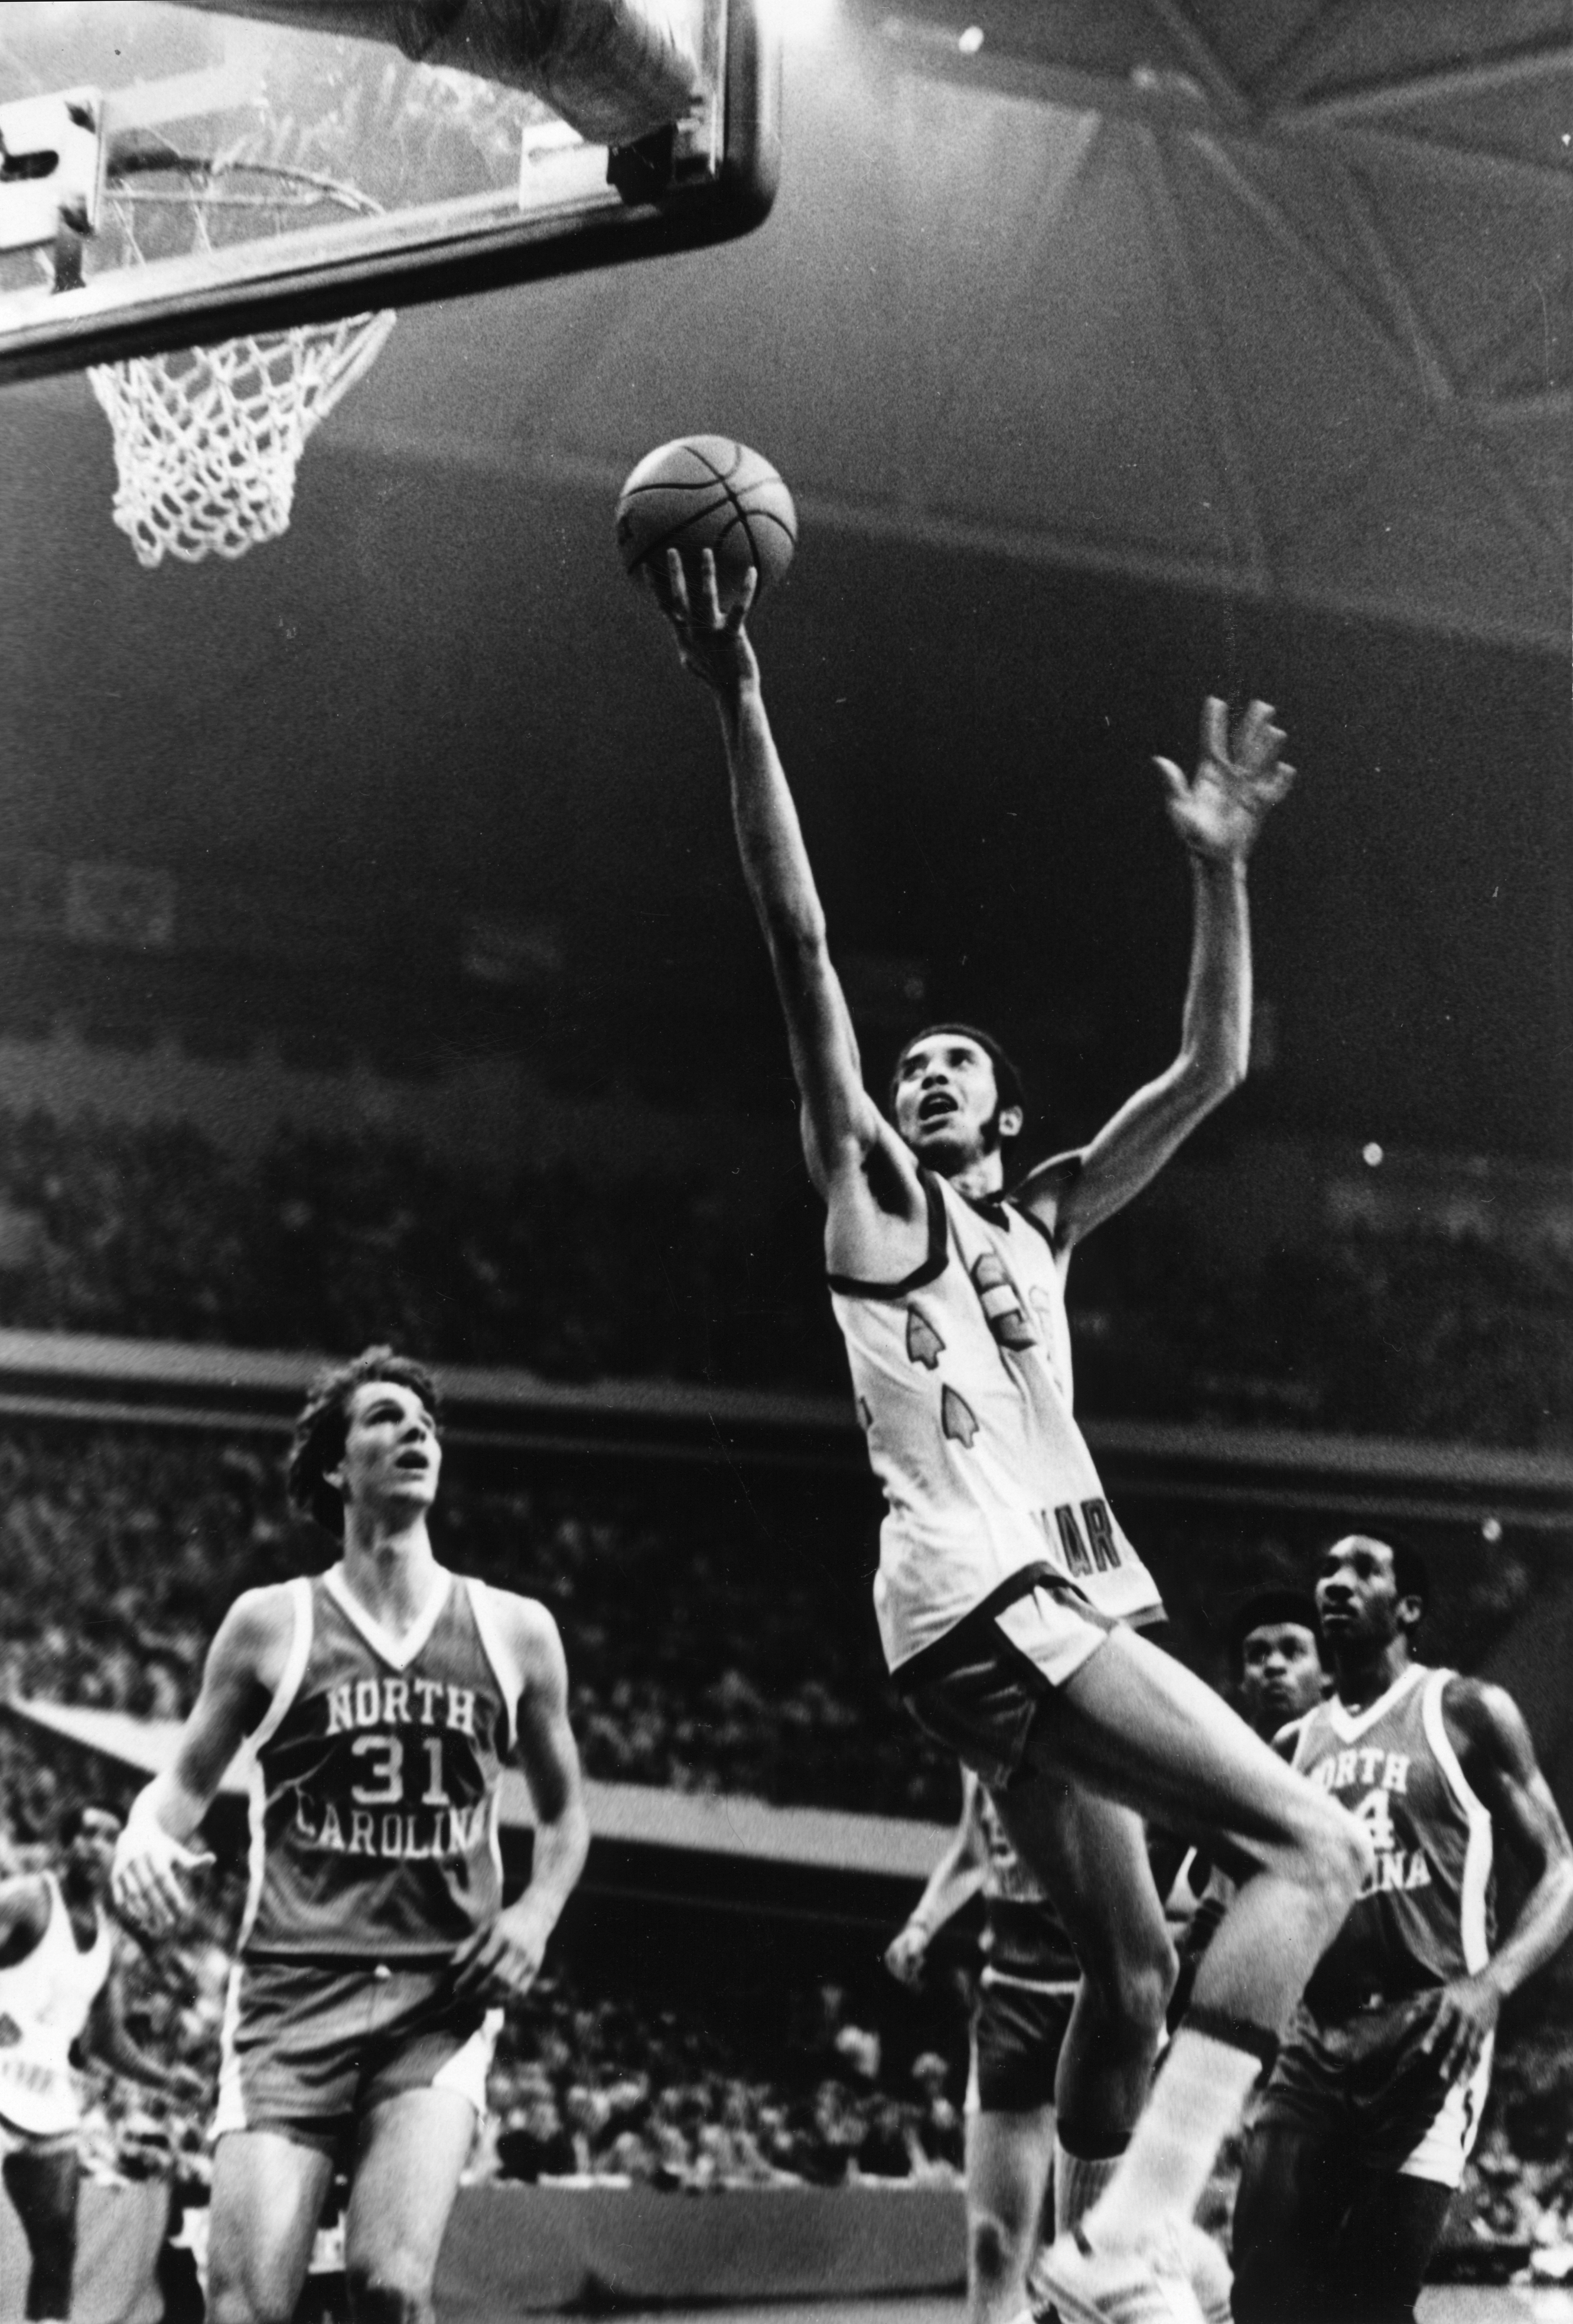 Former Marquette star, Bo Ellis, shoots a layup in the 1977 NCAA championship game against Norht Carolina, March 28, 1977. (Photo courtesy of Marquette Athletics.)